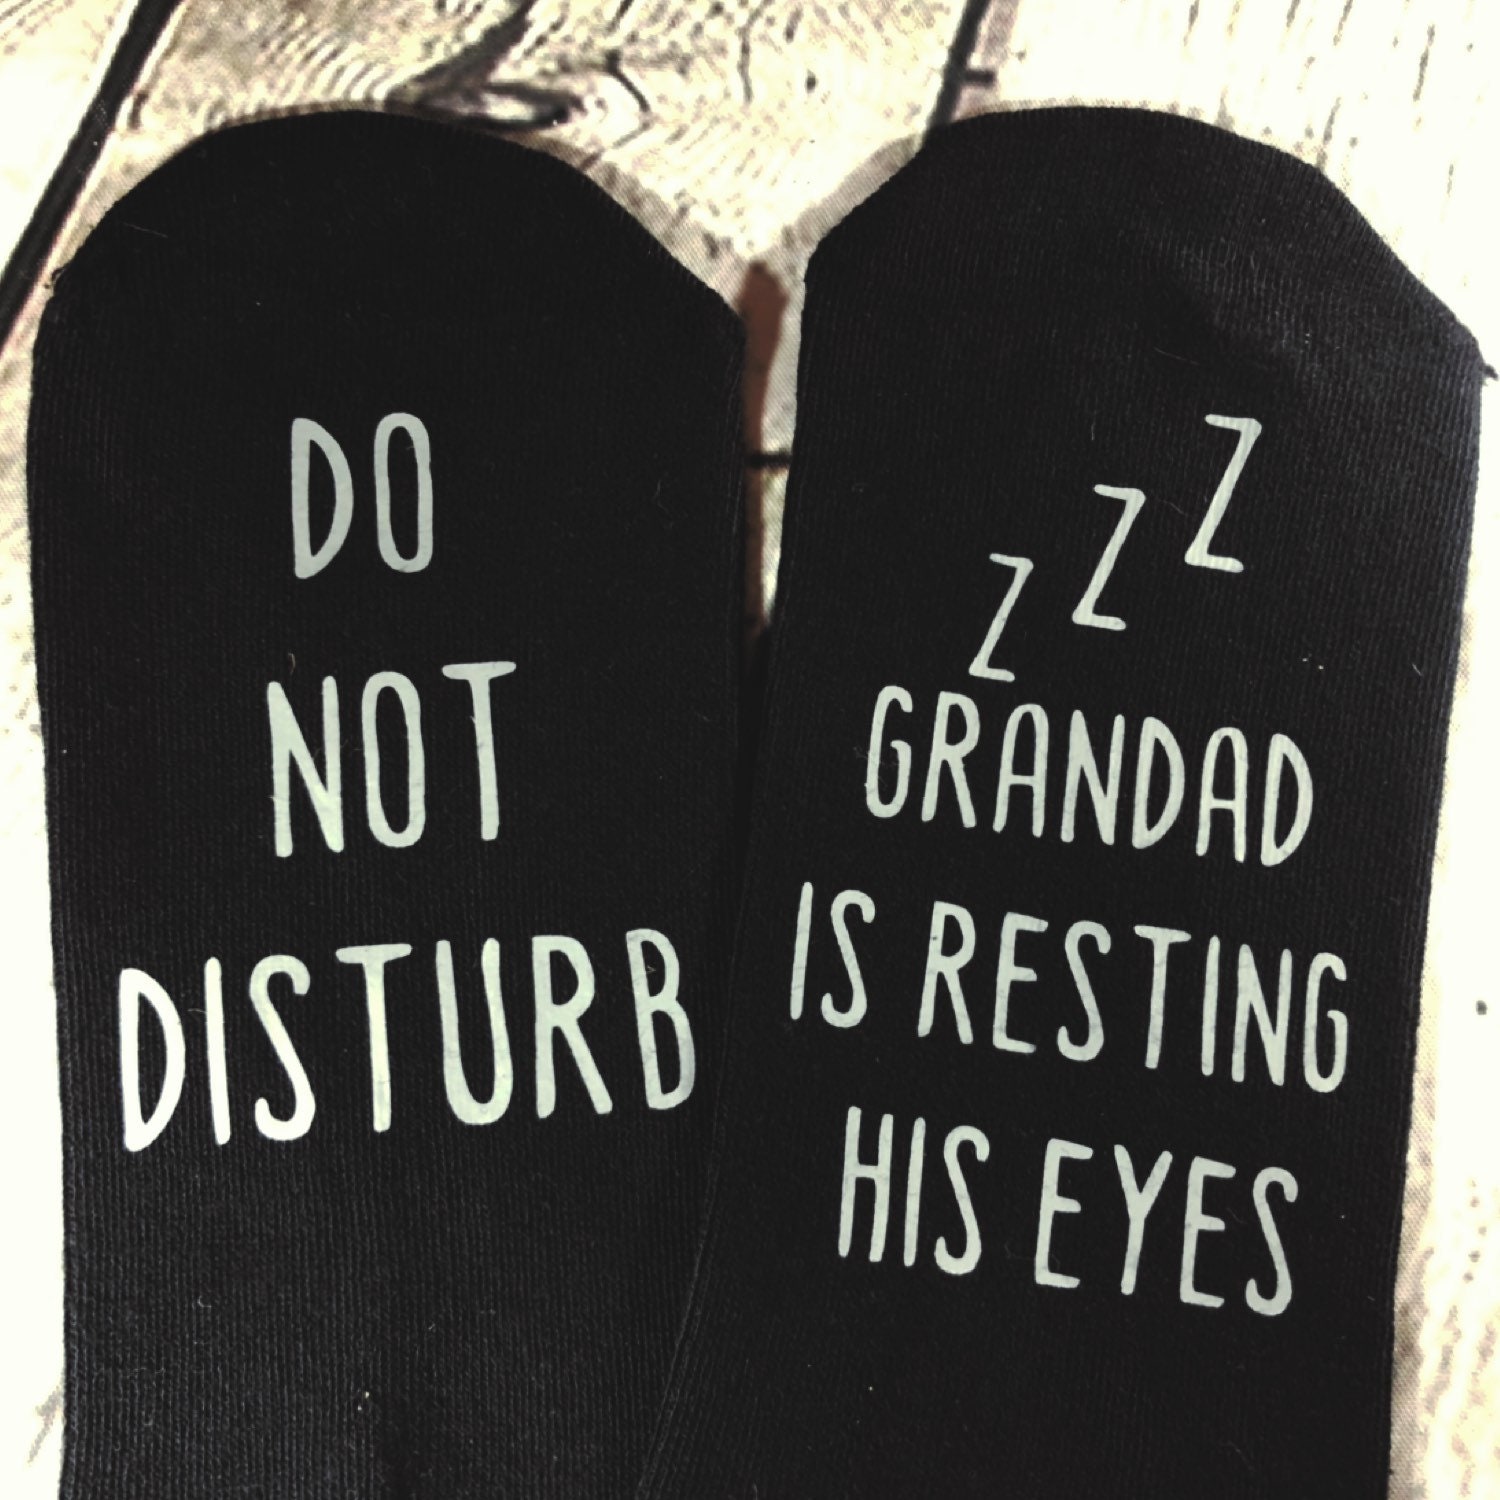 Do Not Disturb Grandad Is Resting His Eyes Socks - Novelty Cotton Gifts Family Stocking Filler